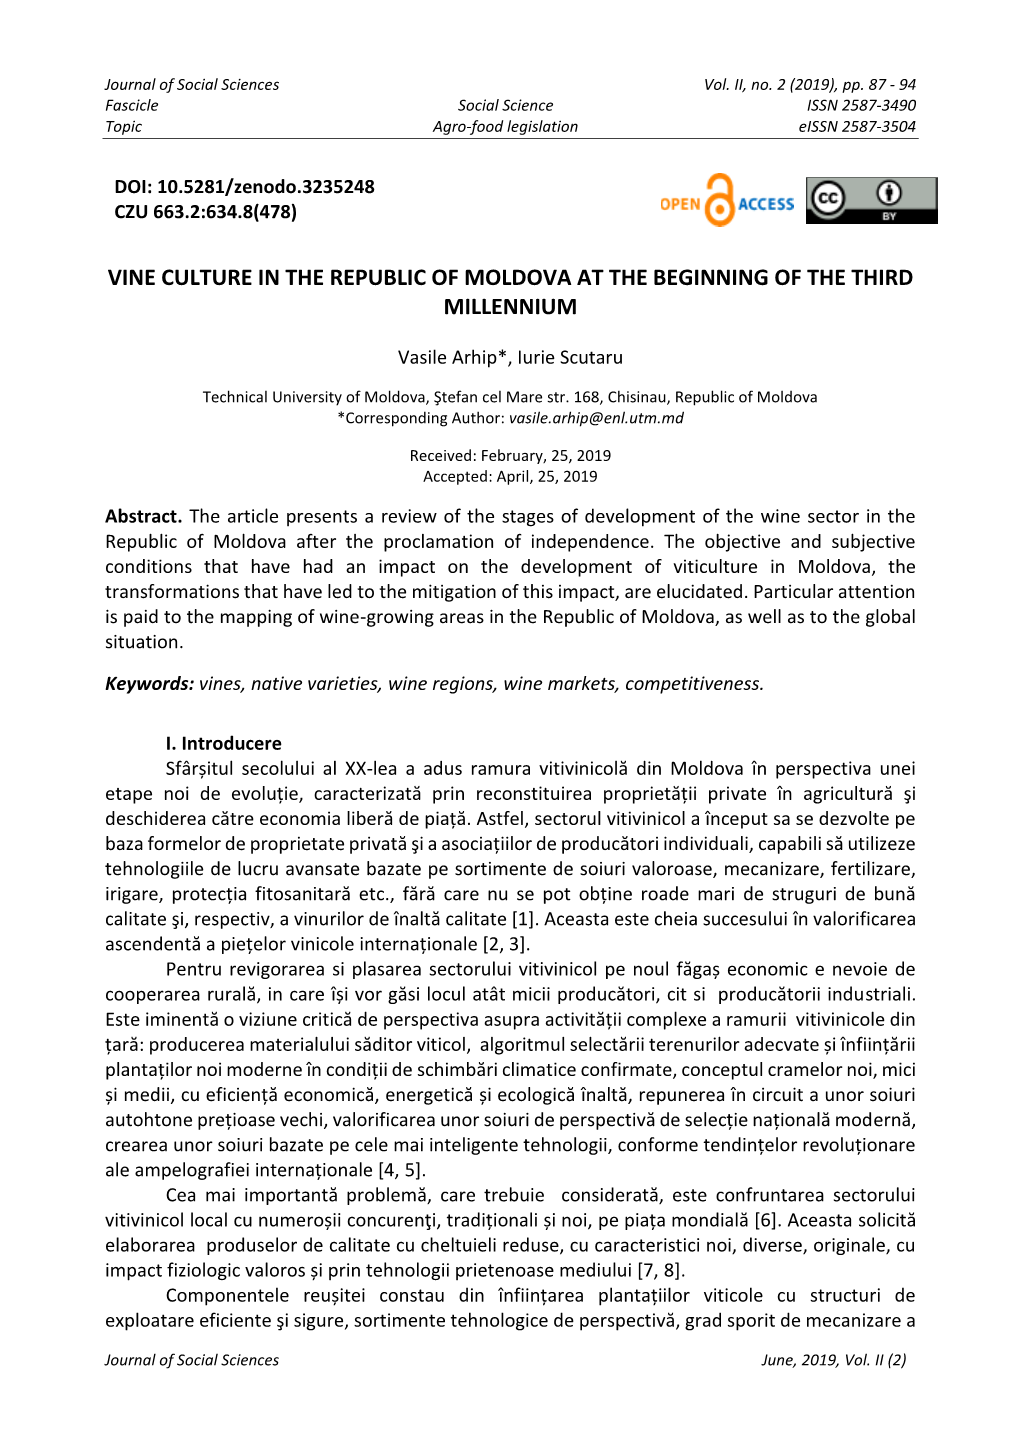 Vine Culture in the Republic of Moldova at the Beginning of the Third Millennium